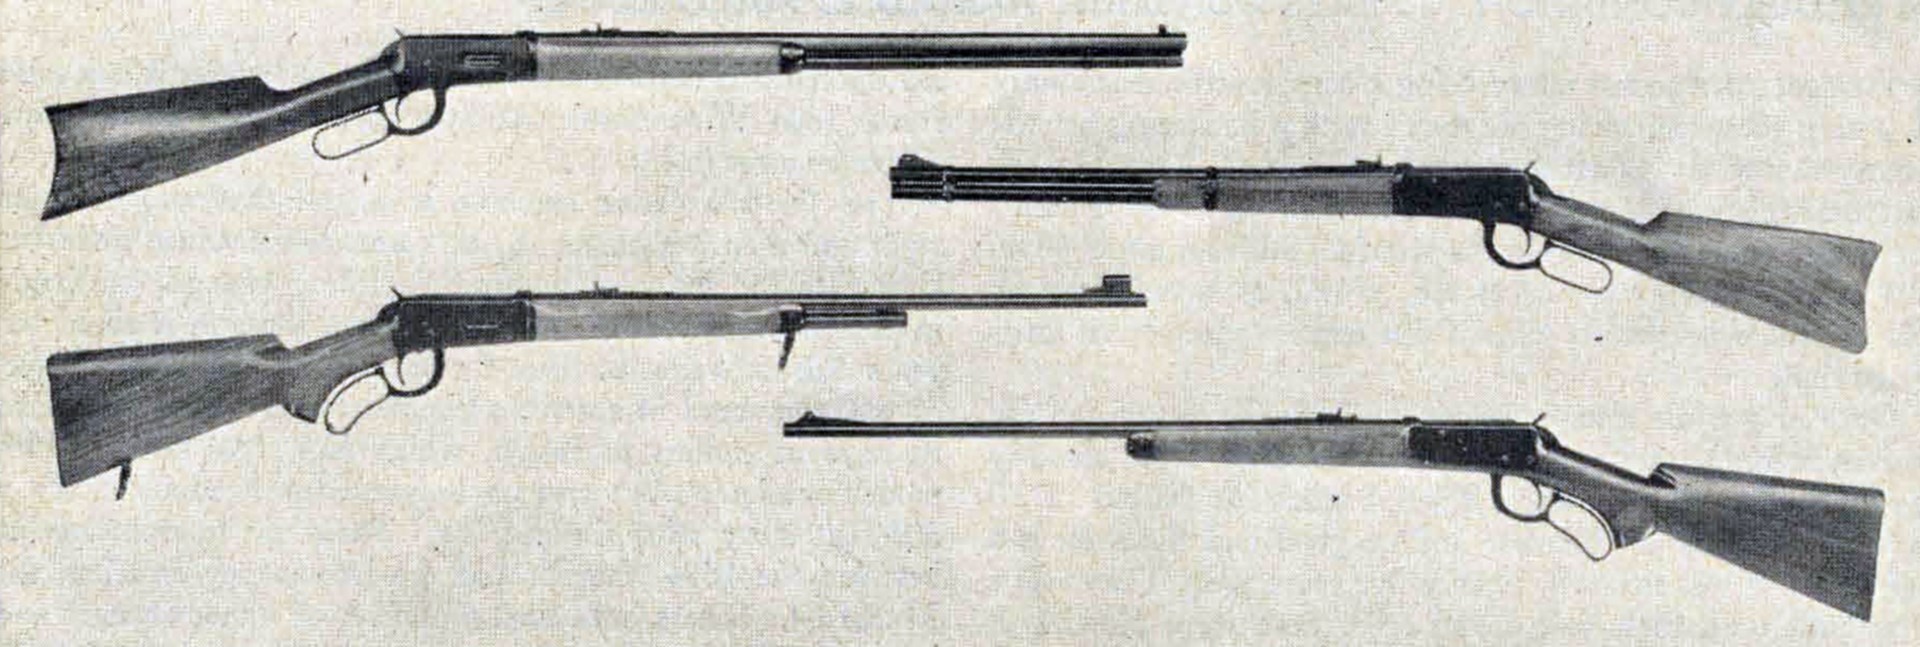 Four Winchester rifle models, produced over a half-century, are variations of the model '94 rifle (at top), which was made in calibers .32-40, .38-55, ,30-30, 25-35, and .32 Special. The parts of the 94 are interchangeable with parts of the other three guns shown here, the model 94 carbine (second from top), model 55 (second from bottom), and model 64 (bottom). The model 64 is still being produced in three calibers, .30-30, .25-35, and .32 Special.